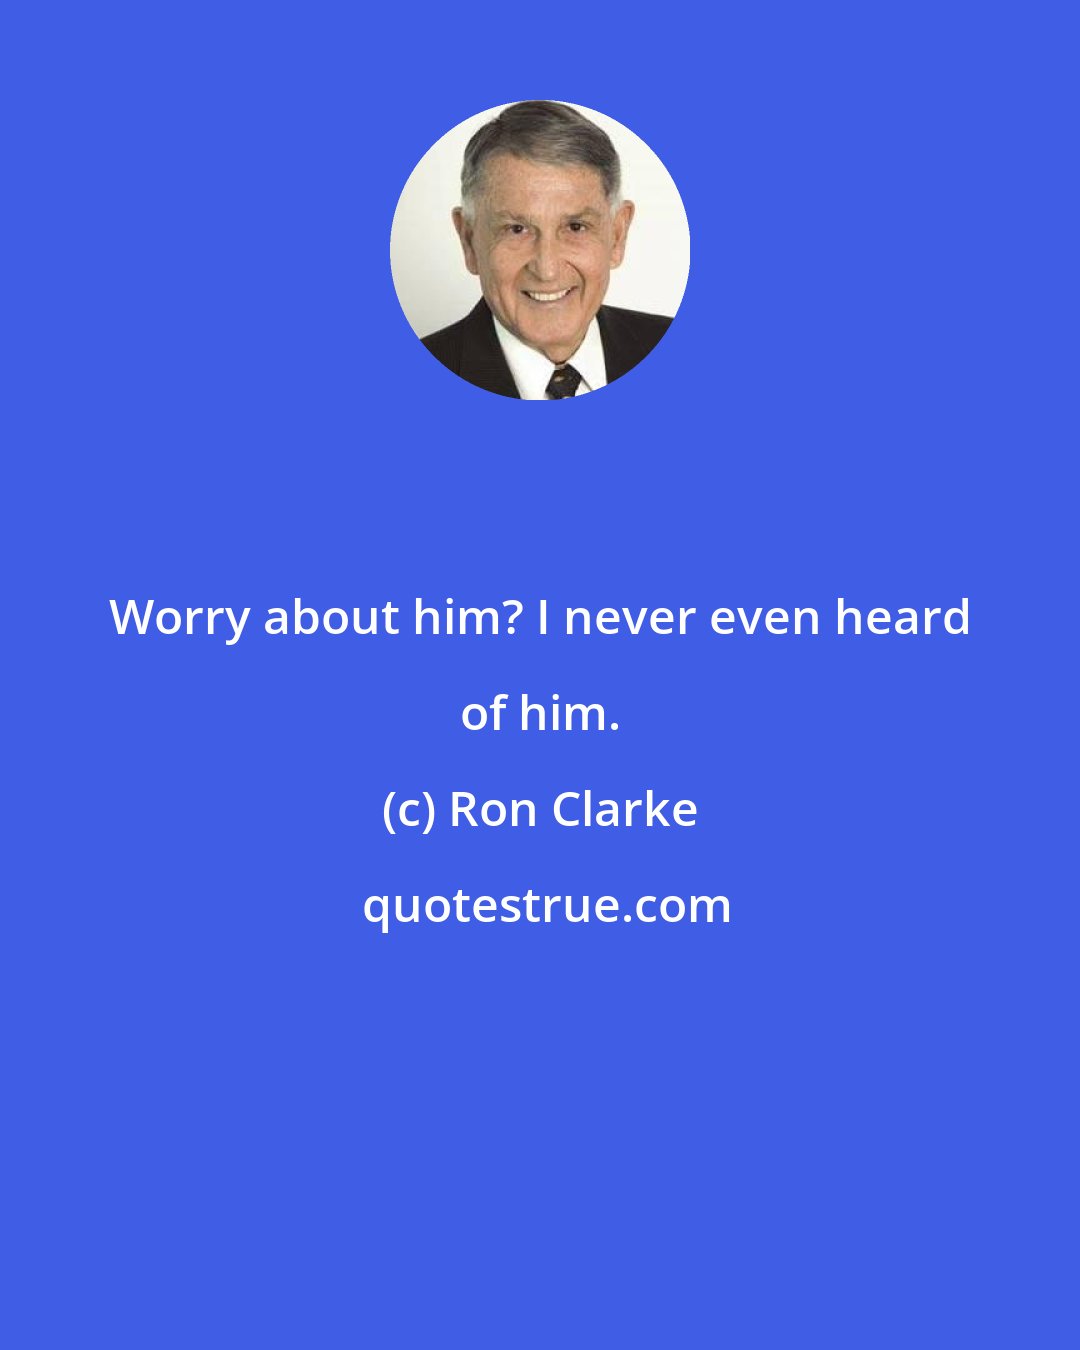 Ron Clarke: Worry about him? I never even heard of him.